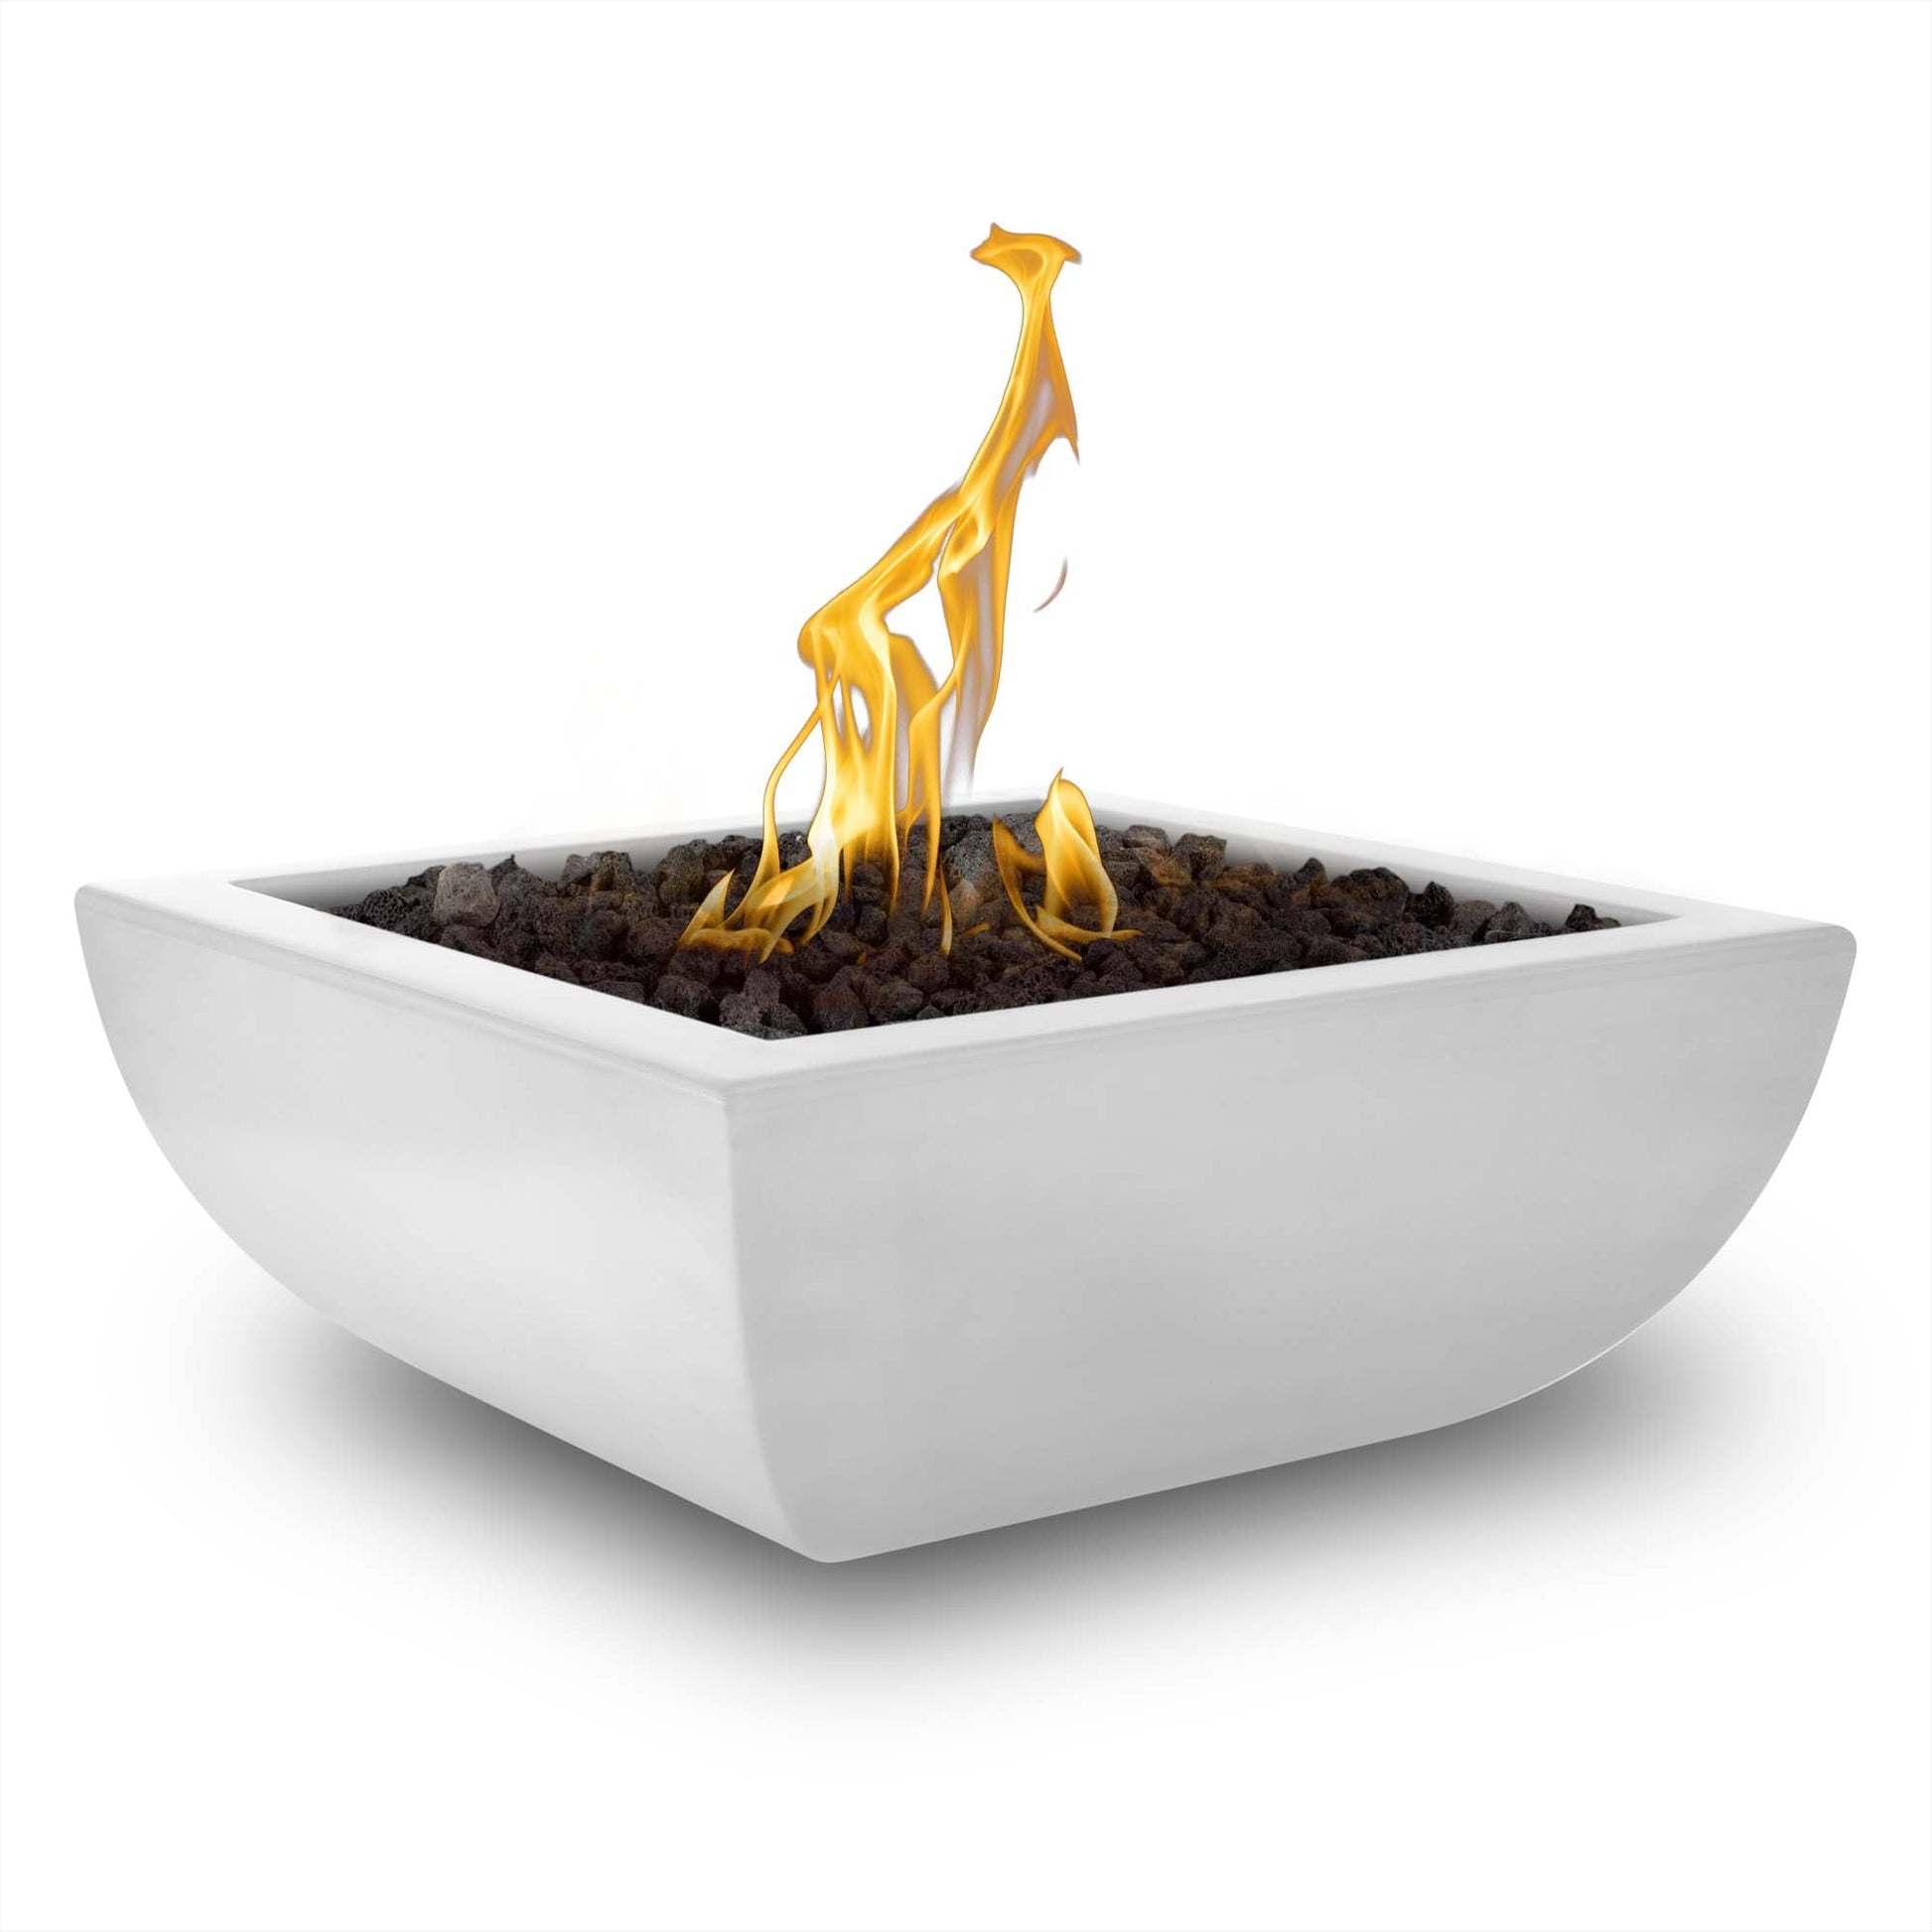 The Outdoor Plus Square Avalon 30" Brown GFRC Concrete Liquid Propane Fire Bowl with Match Lit with Flame Sense Ignition